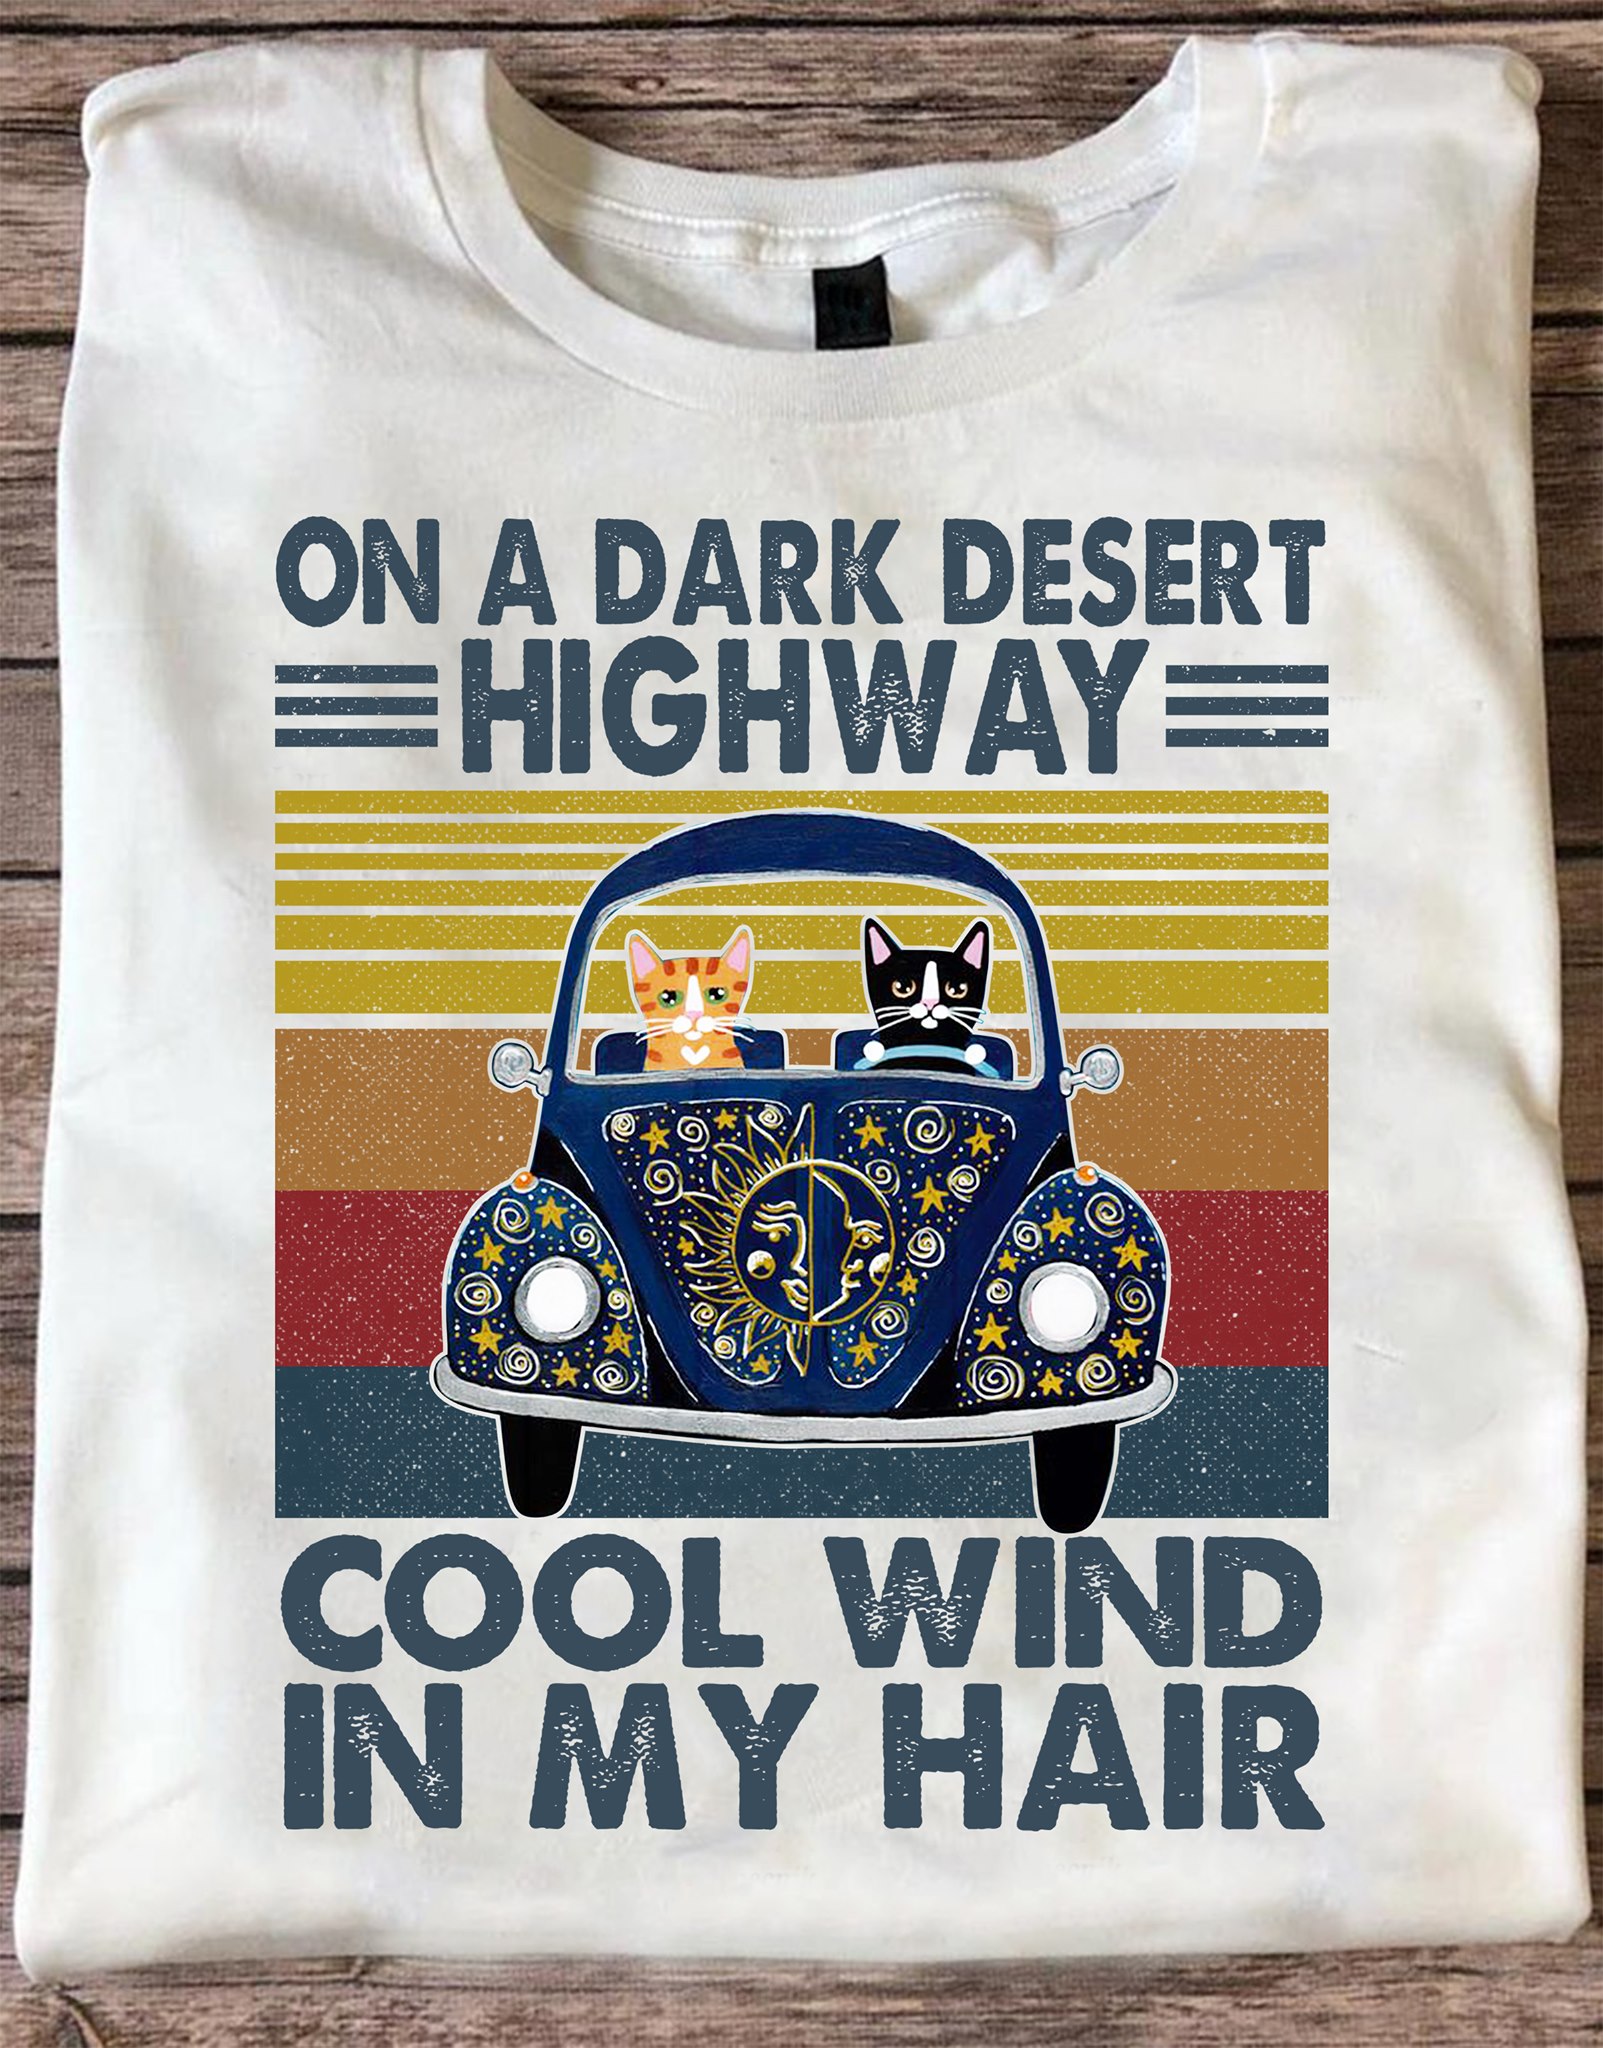 On a dark desert highway cool wind in my hair - Cat driving car